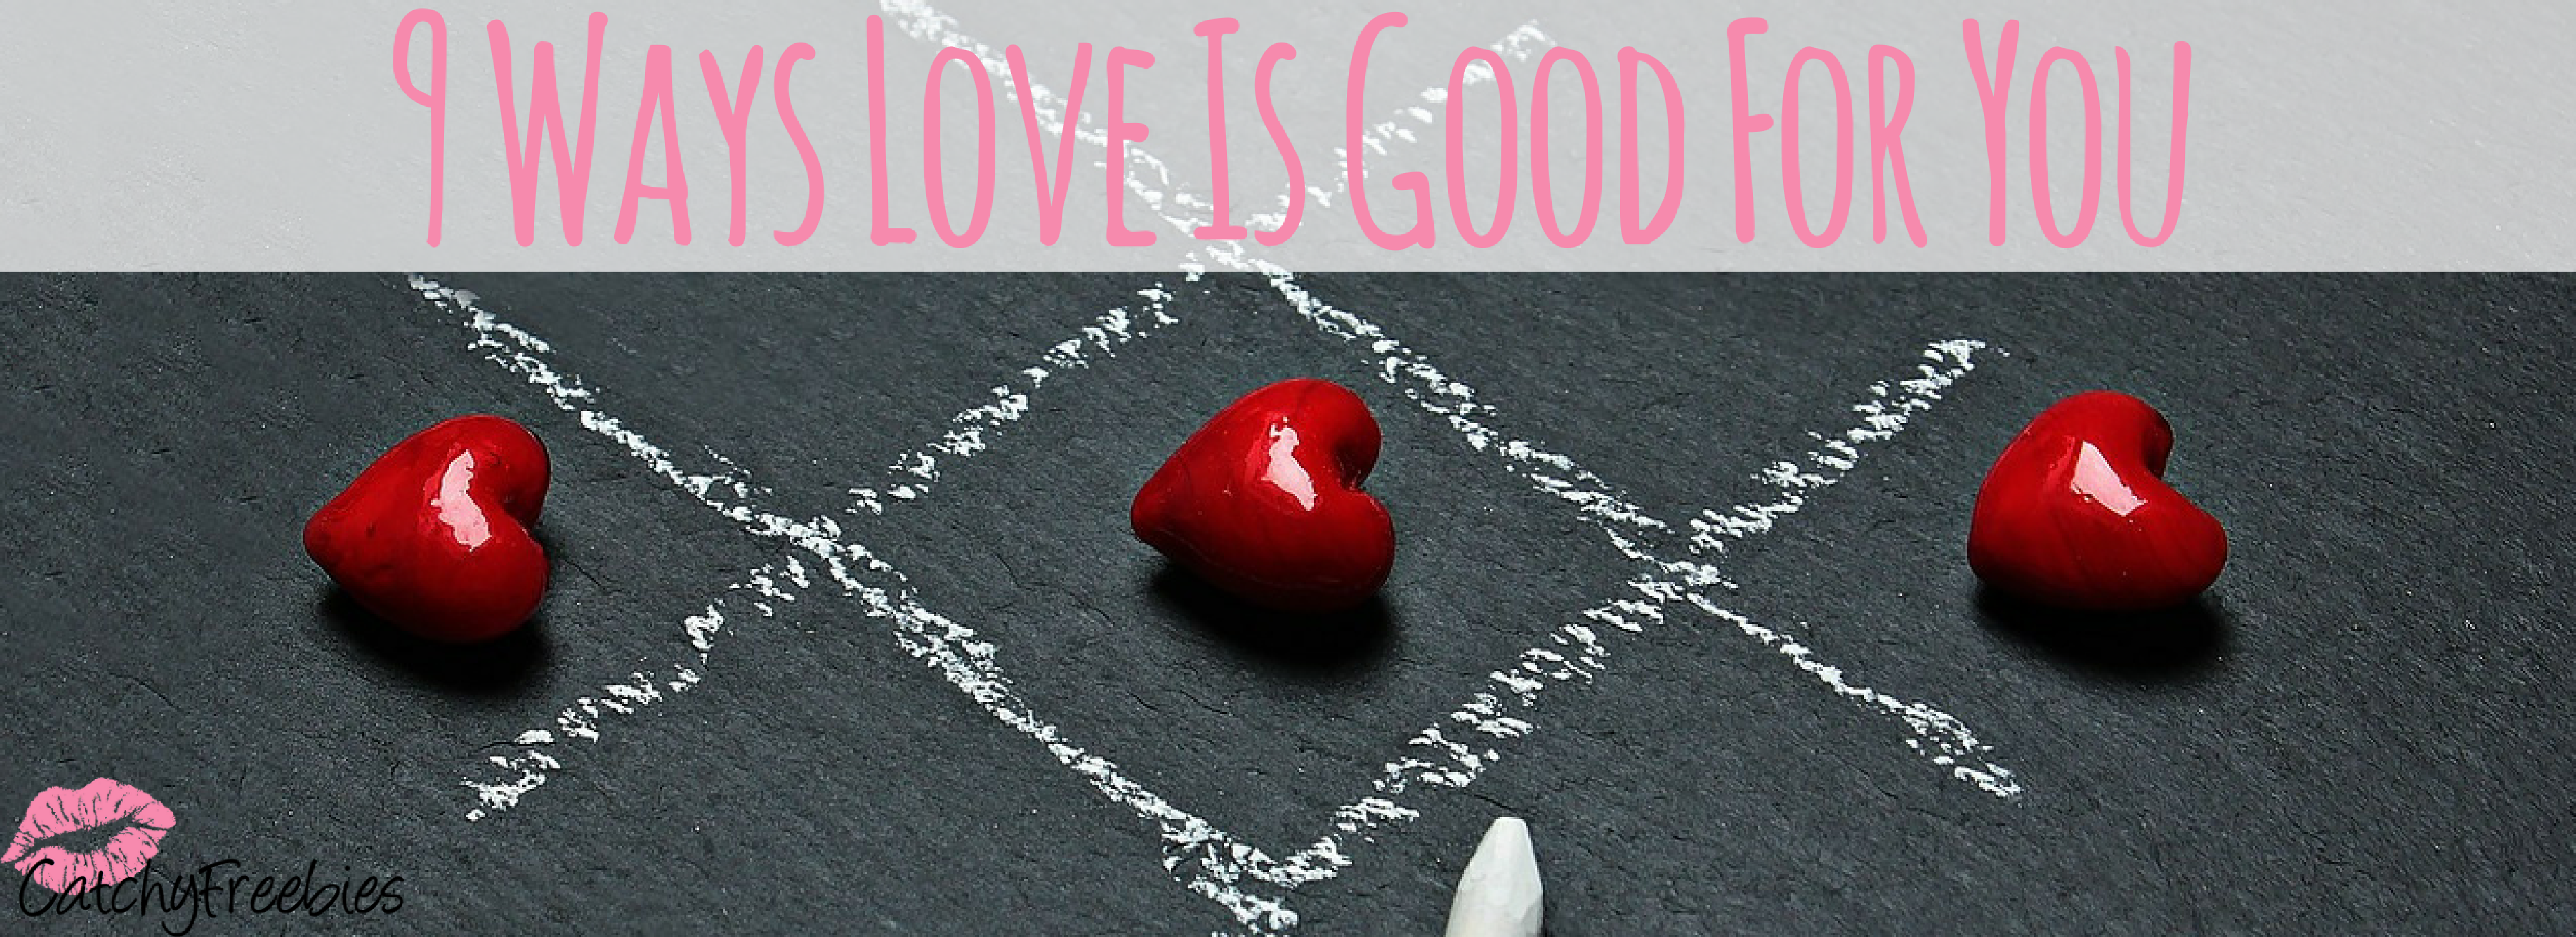 9 Ways Love Is Good For You